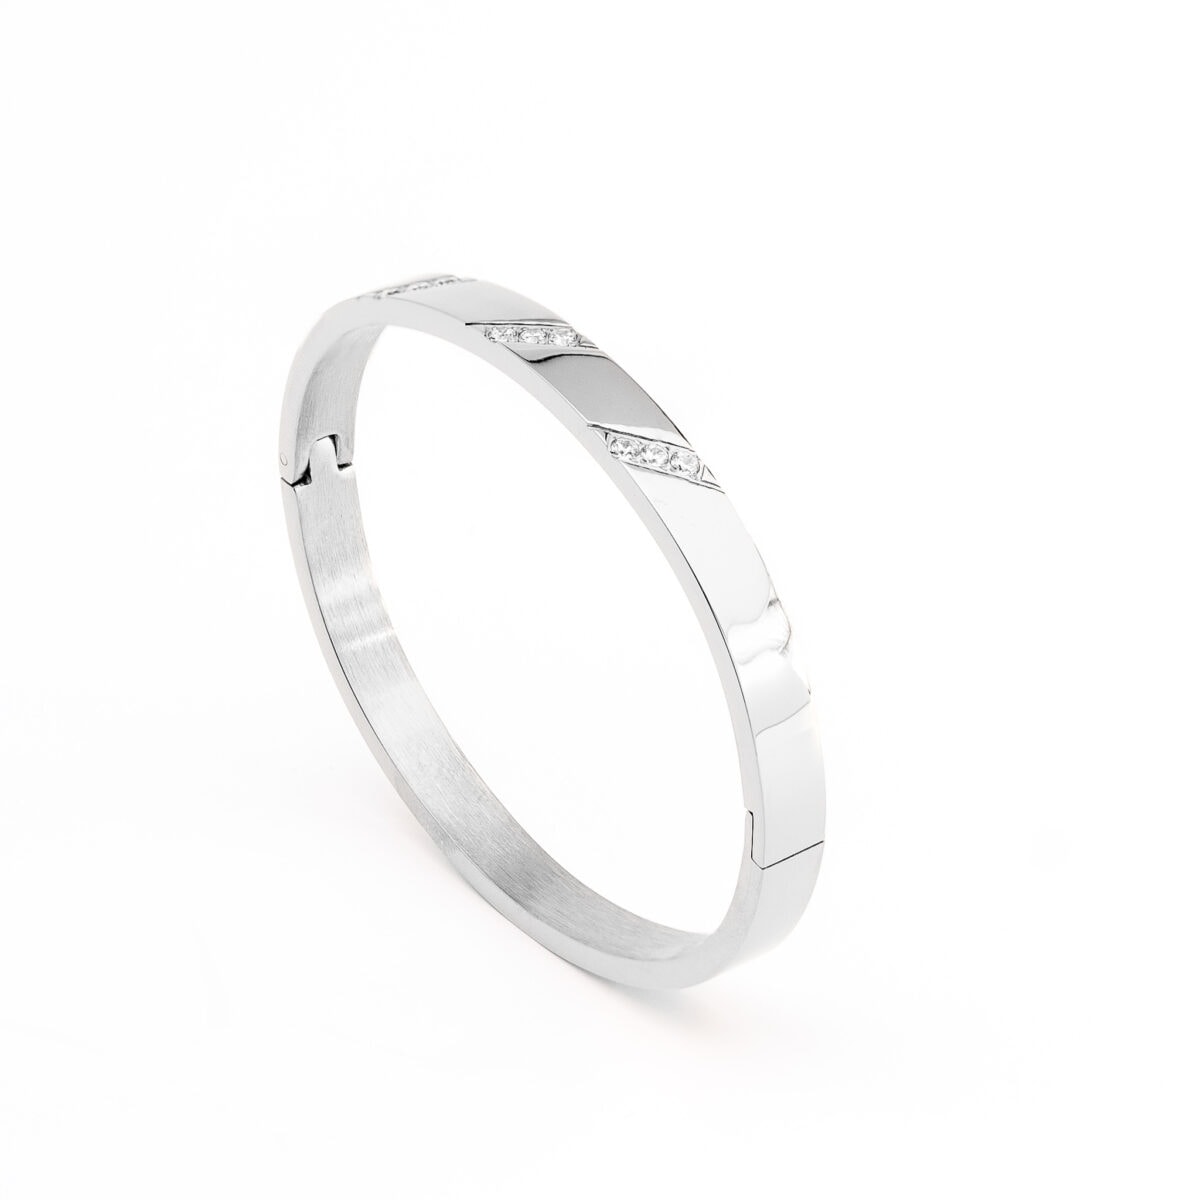 https://m.clubbella.co/product/siena-silver-bangle/ Siena Silver Bnagle (2)